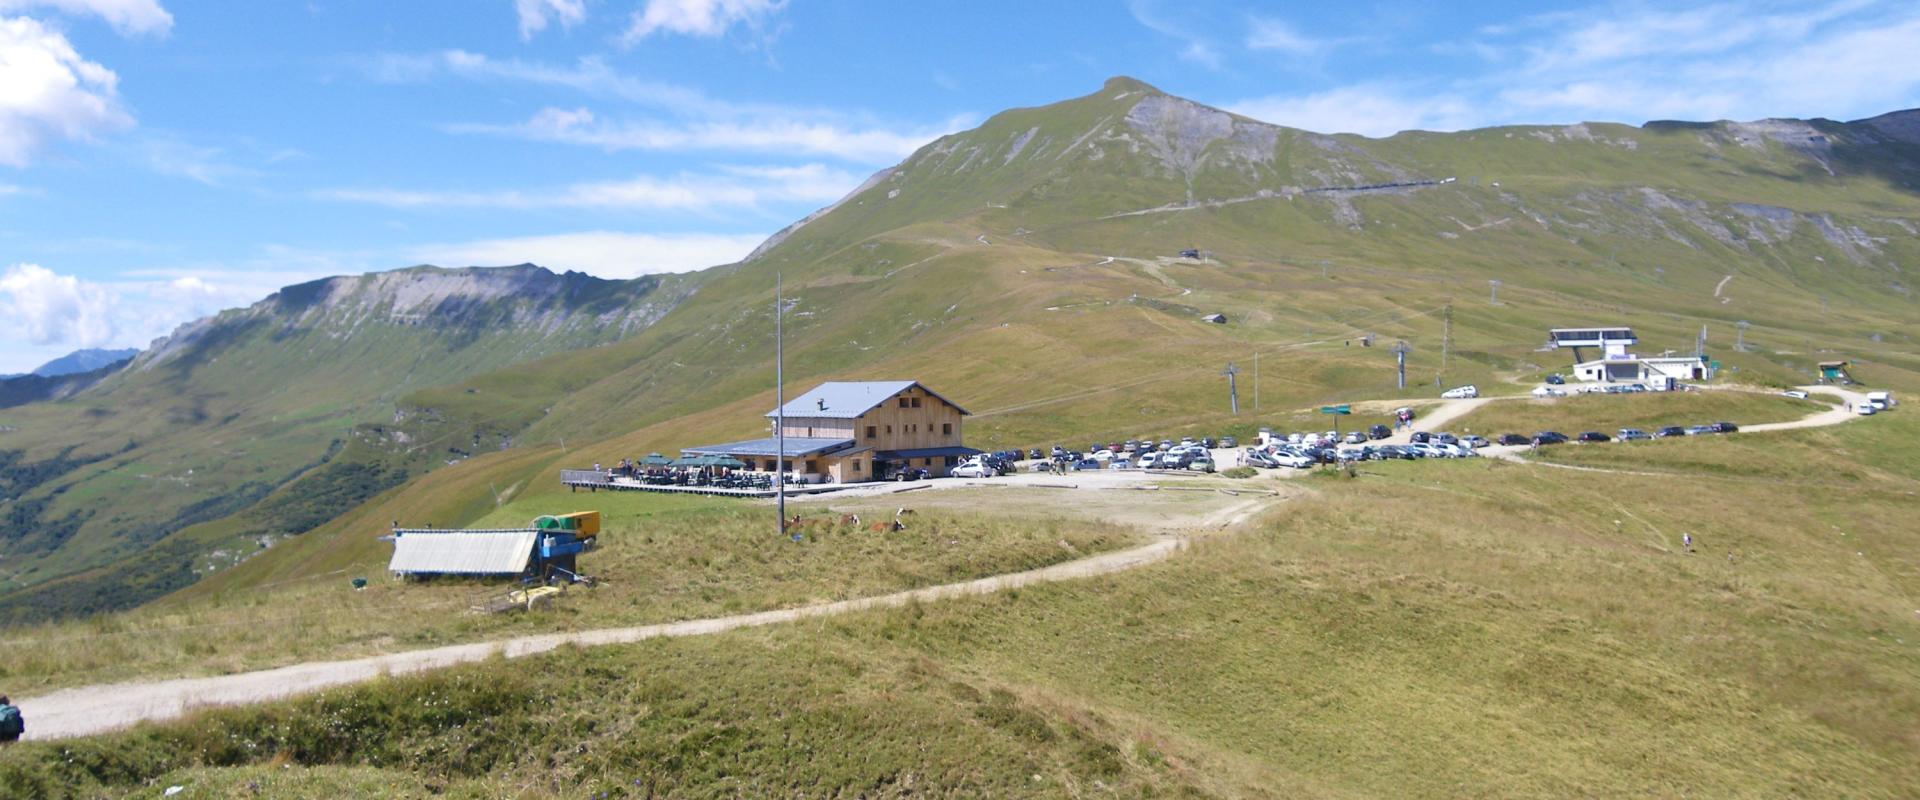 Le_col_du_joly_-_panoramio - chisloup CC BY 3.0  Wikimedia Commons.jpg